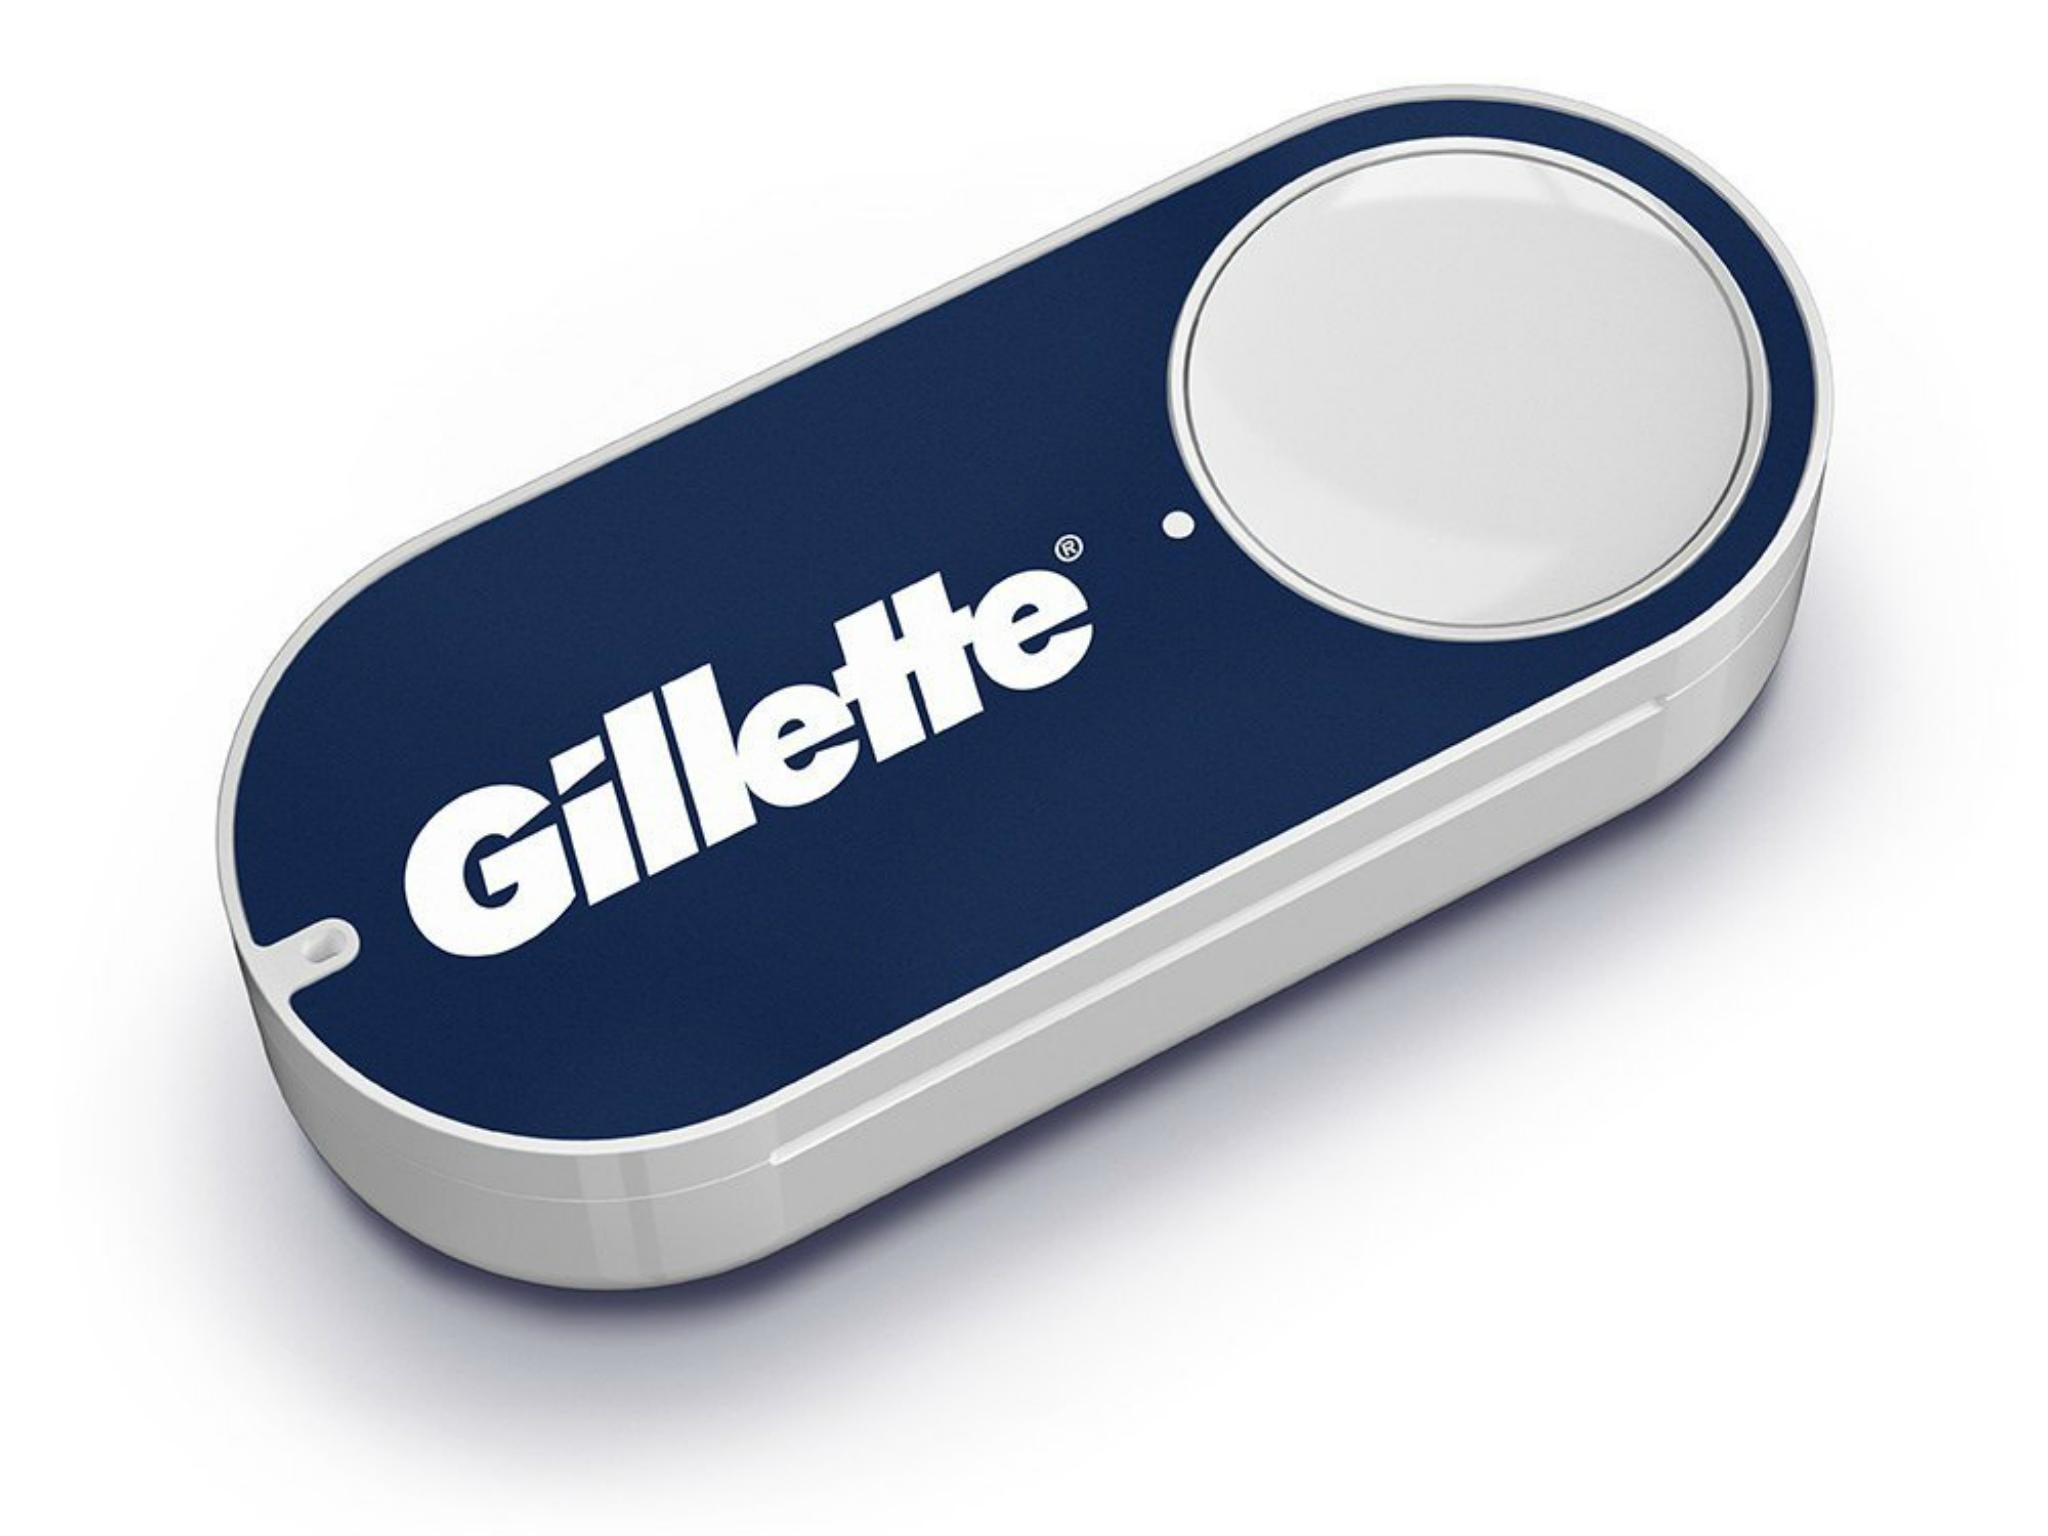 Much of the intrigue around the physical Dash button has been generated by the product’s sheer weirdness